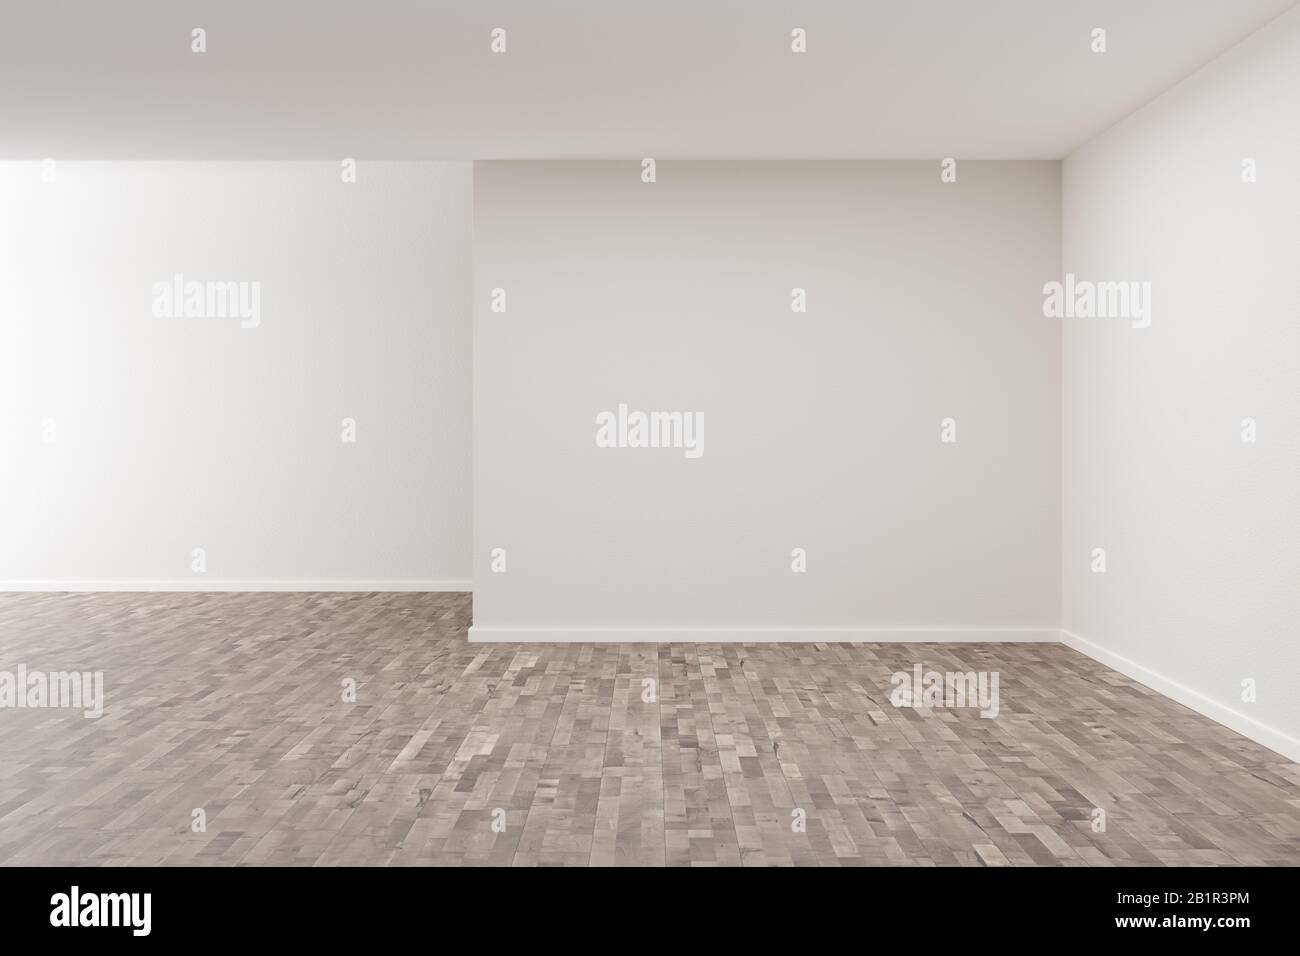 Empty white room with blank walls and brown hardwood floor - presentation or gallery architecture background element, 3D illustration Stock Photo